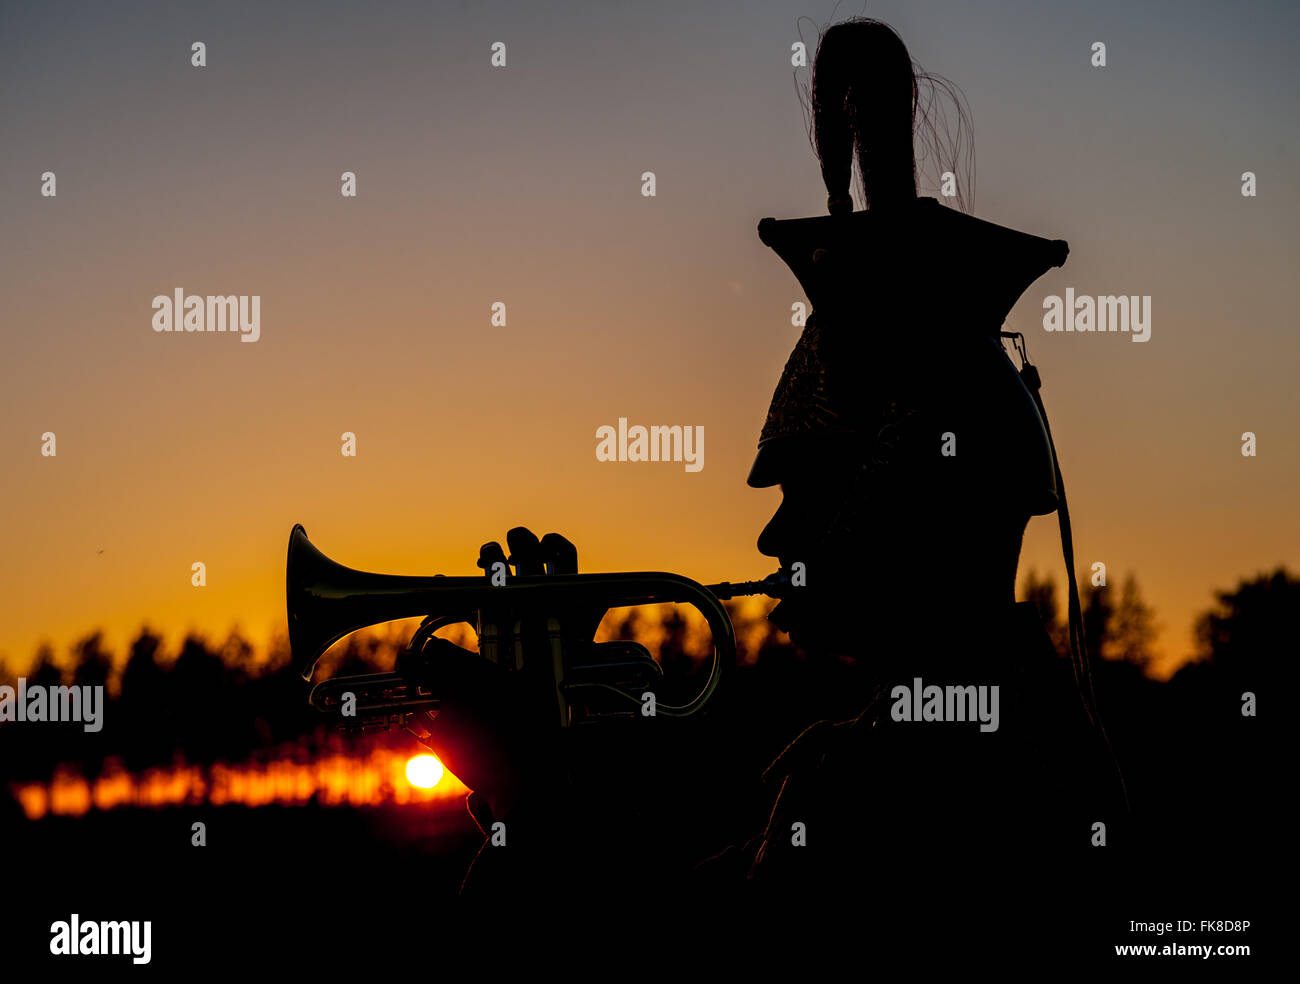 The Divisional Cemetery, Ypres, Belgium - A Military bugler playing The Last Post at sunset in memory of fallen soldiers of World War One Stock Photo